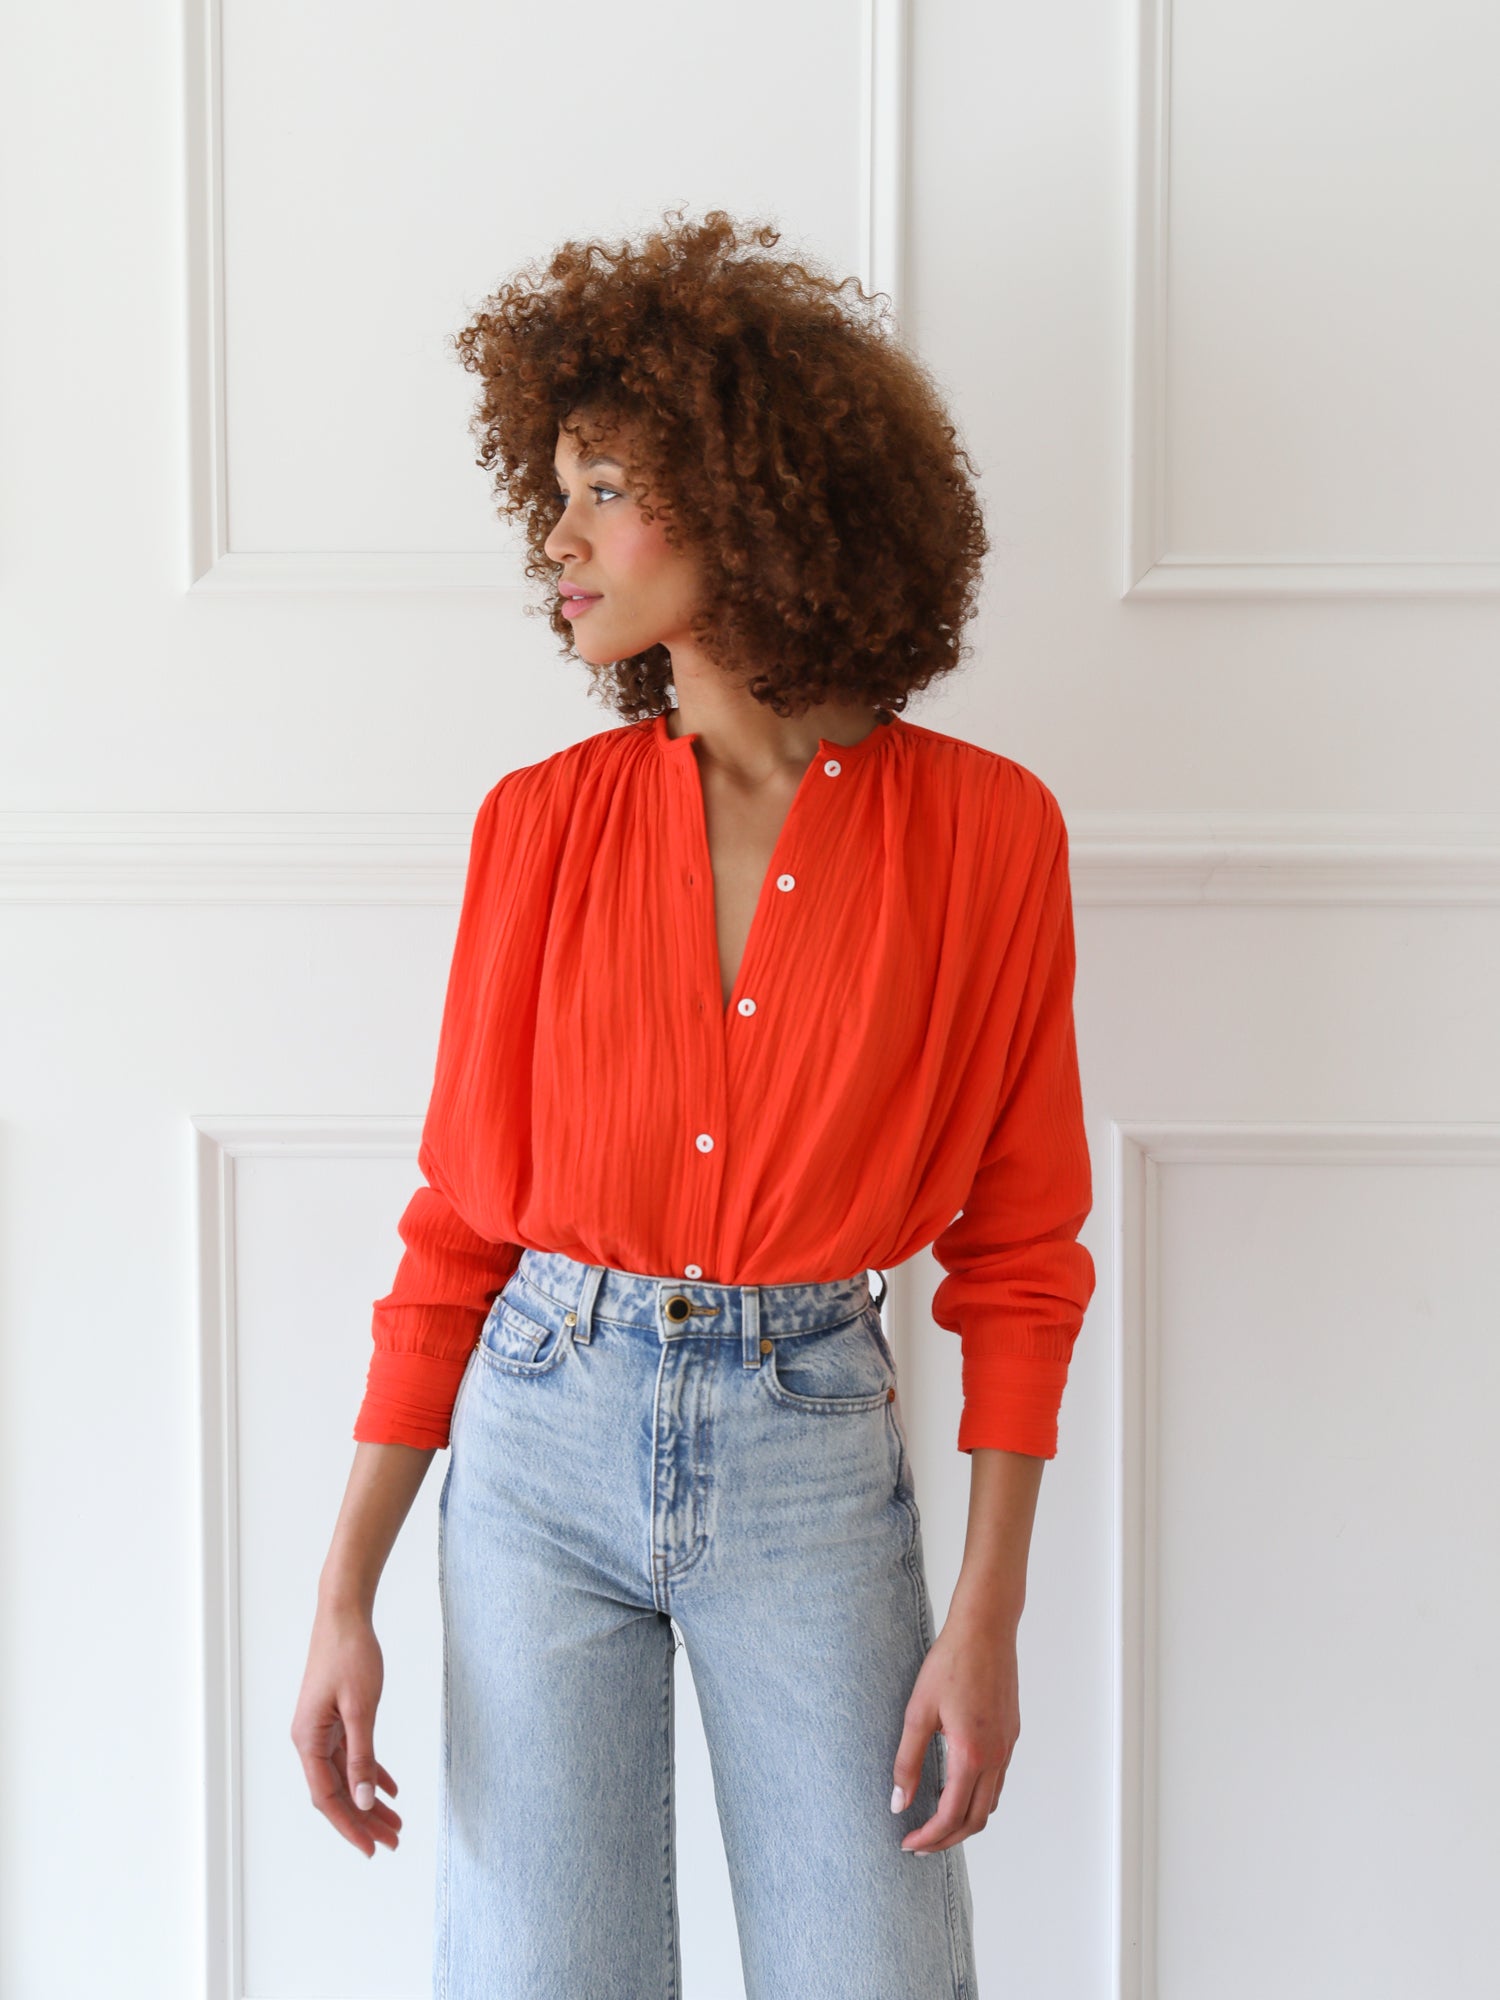 MILLE Clothing Florian Top in Poppy